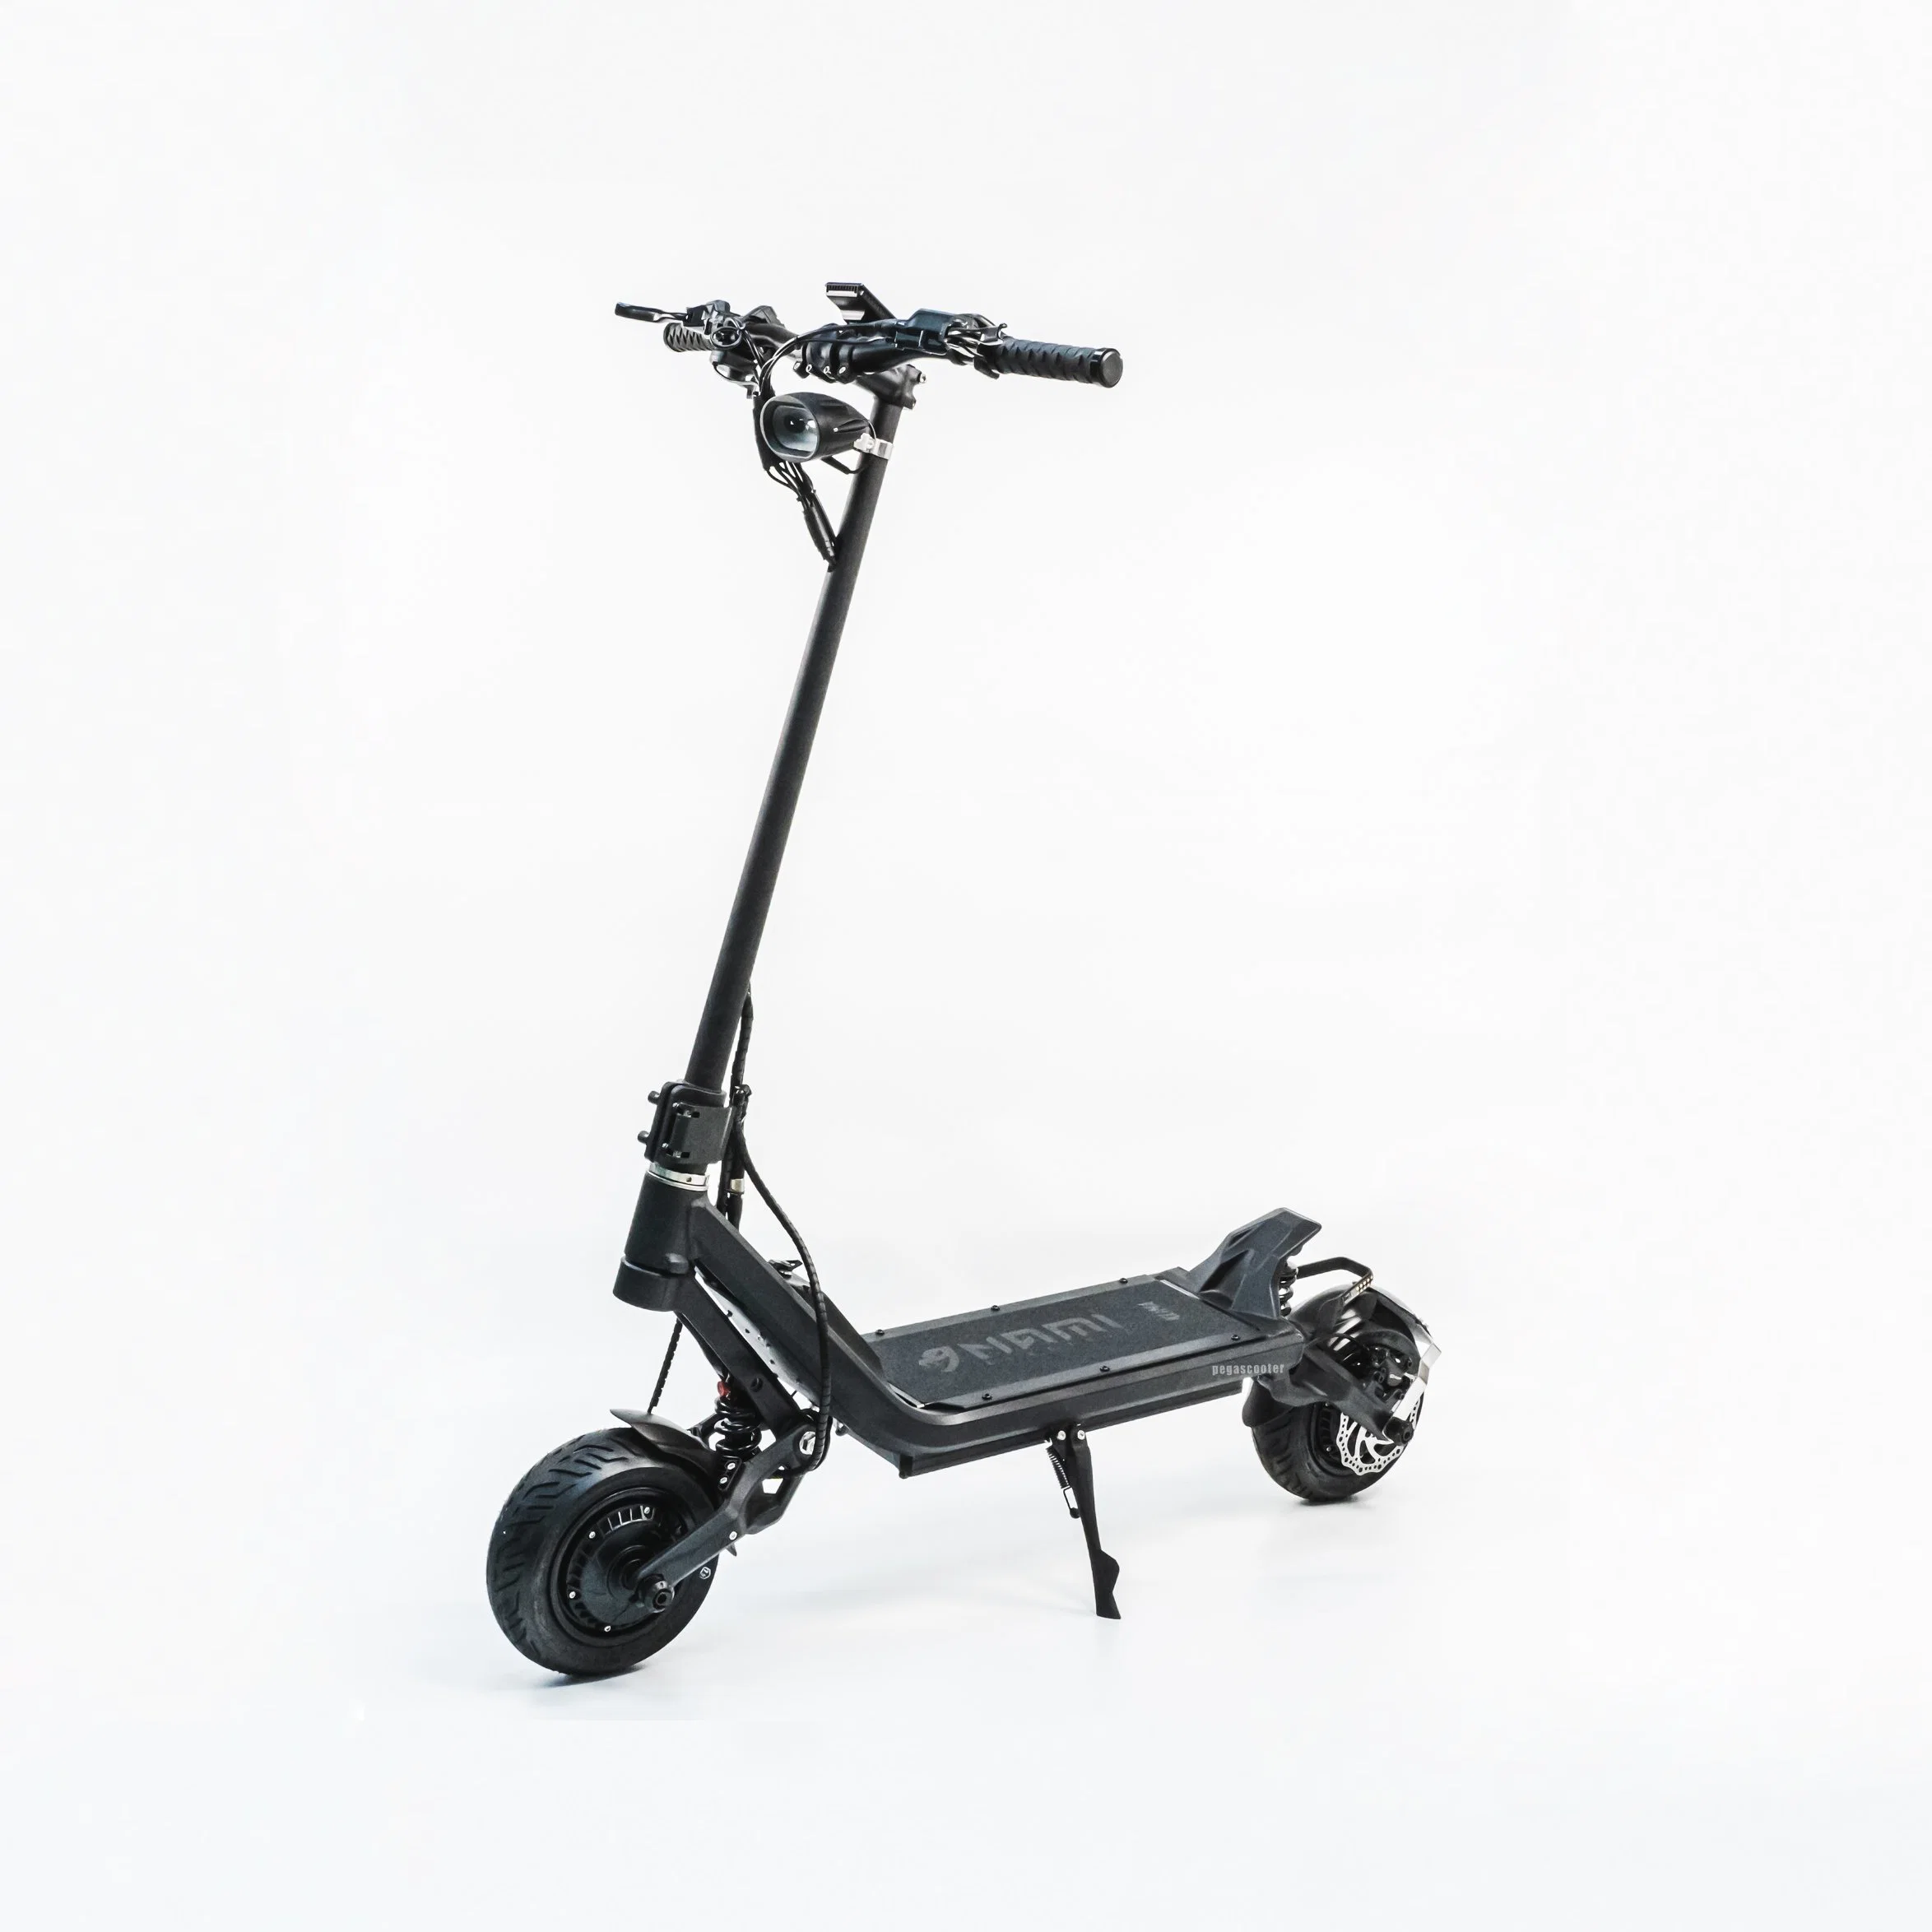 Nami Klima Electric Scooter Dual Motor High Power Escooter Dirt Scooter